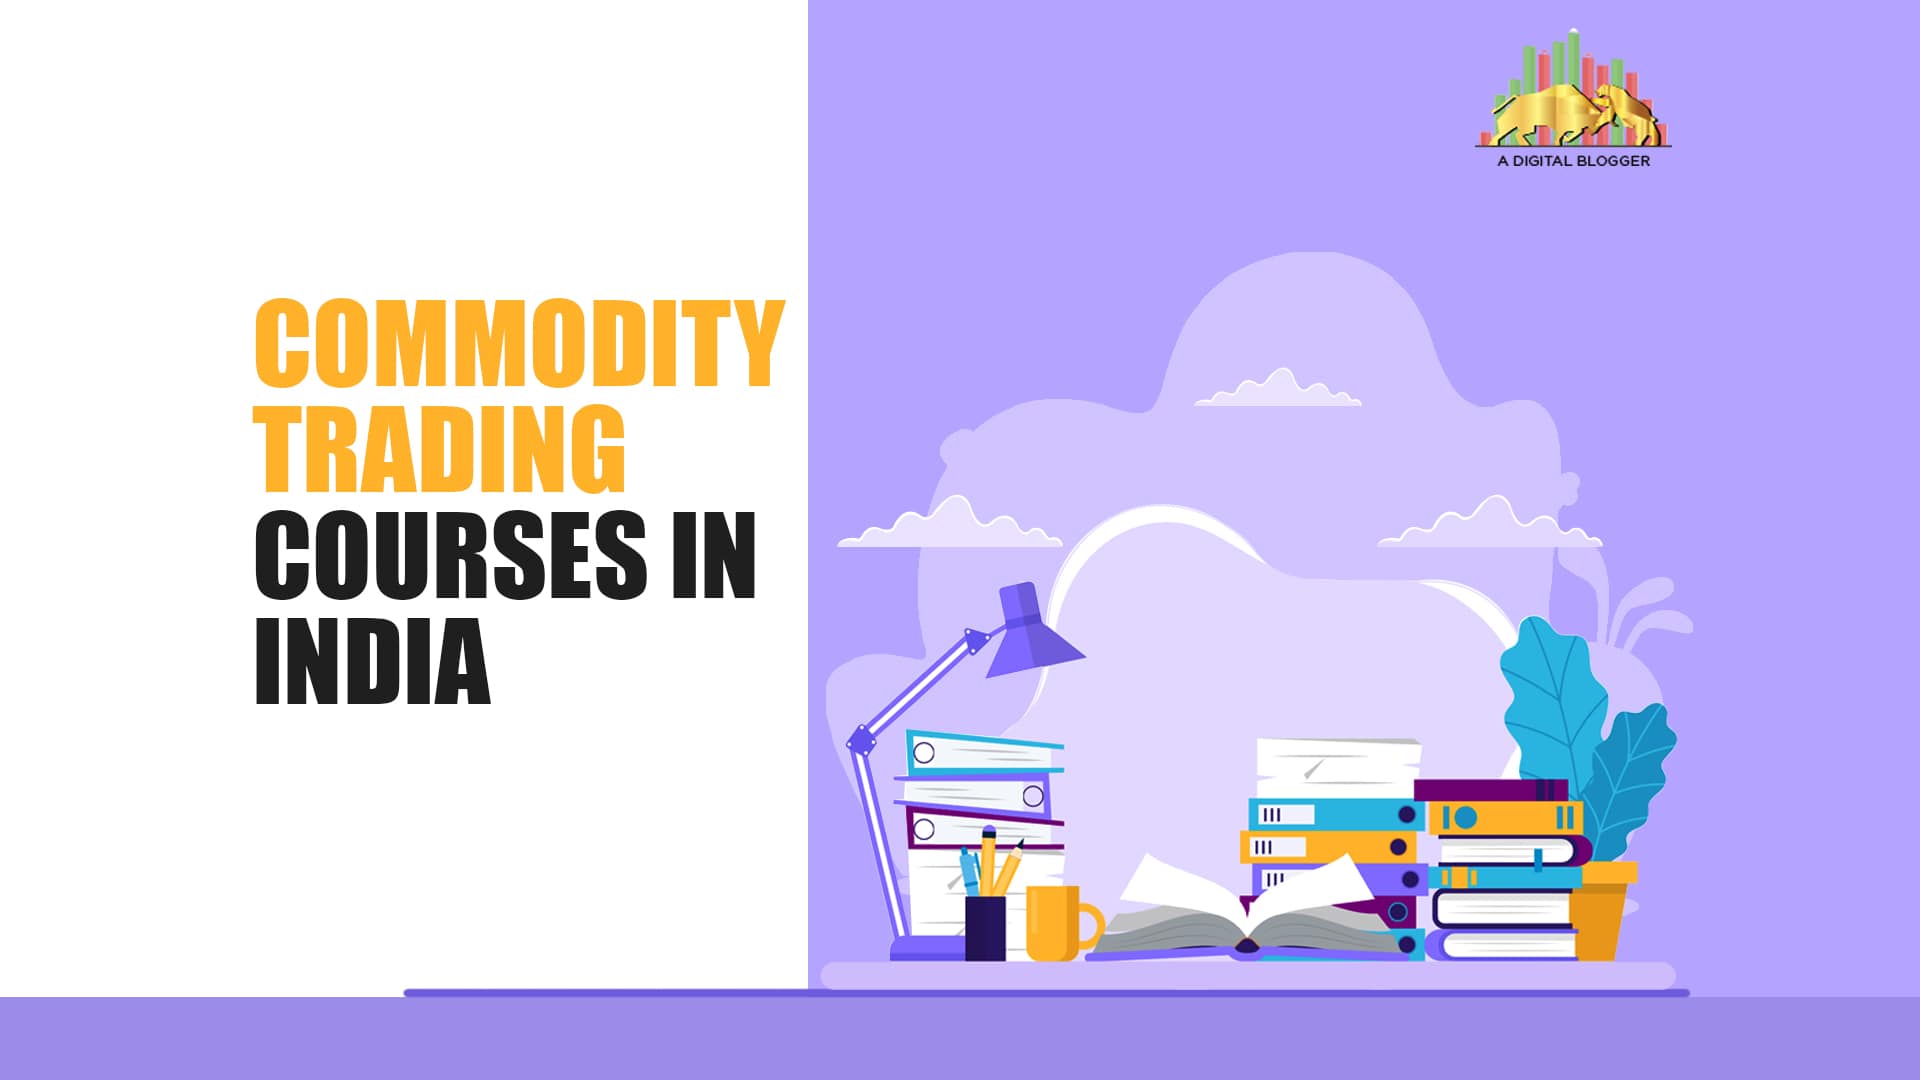 Commodity Trading Courses In India Online, Features, Platforms